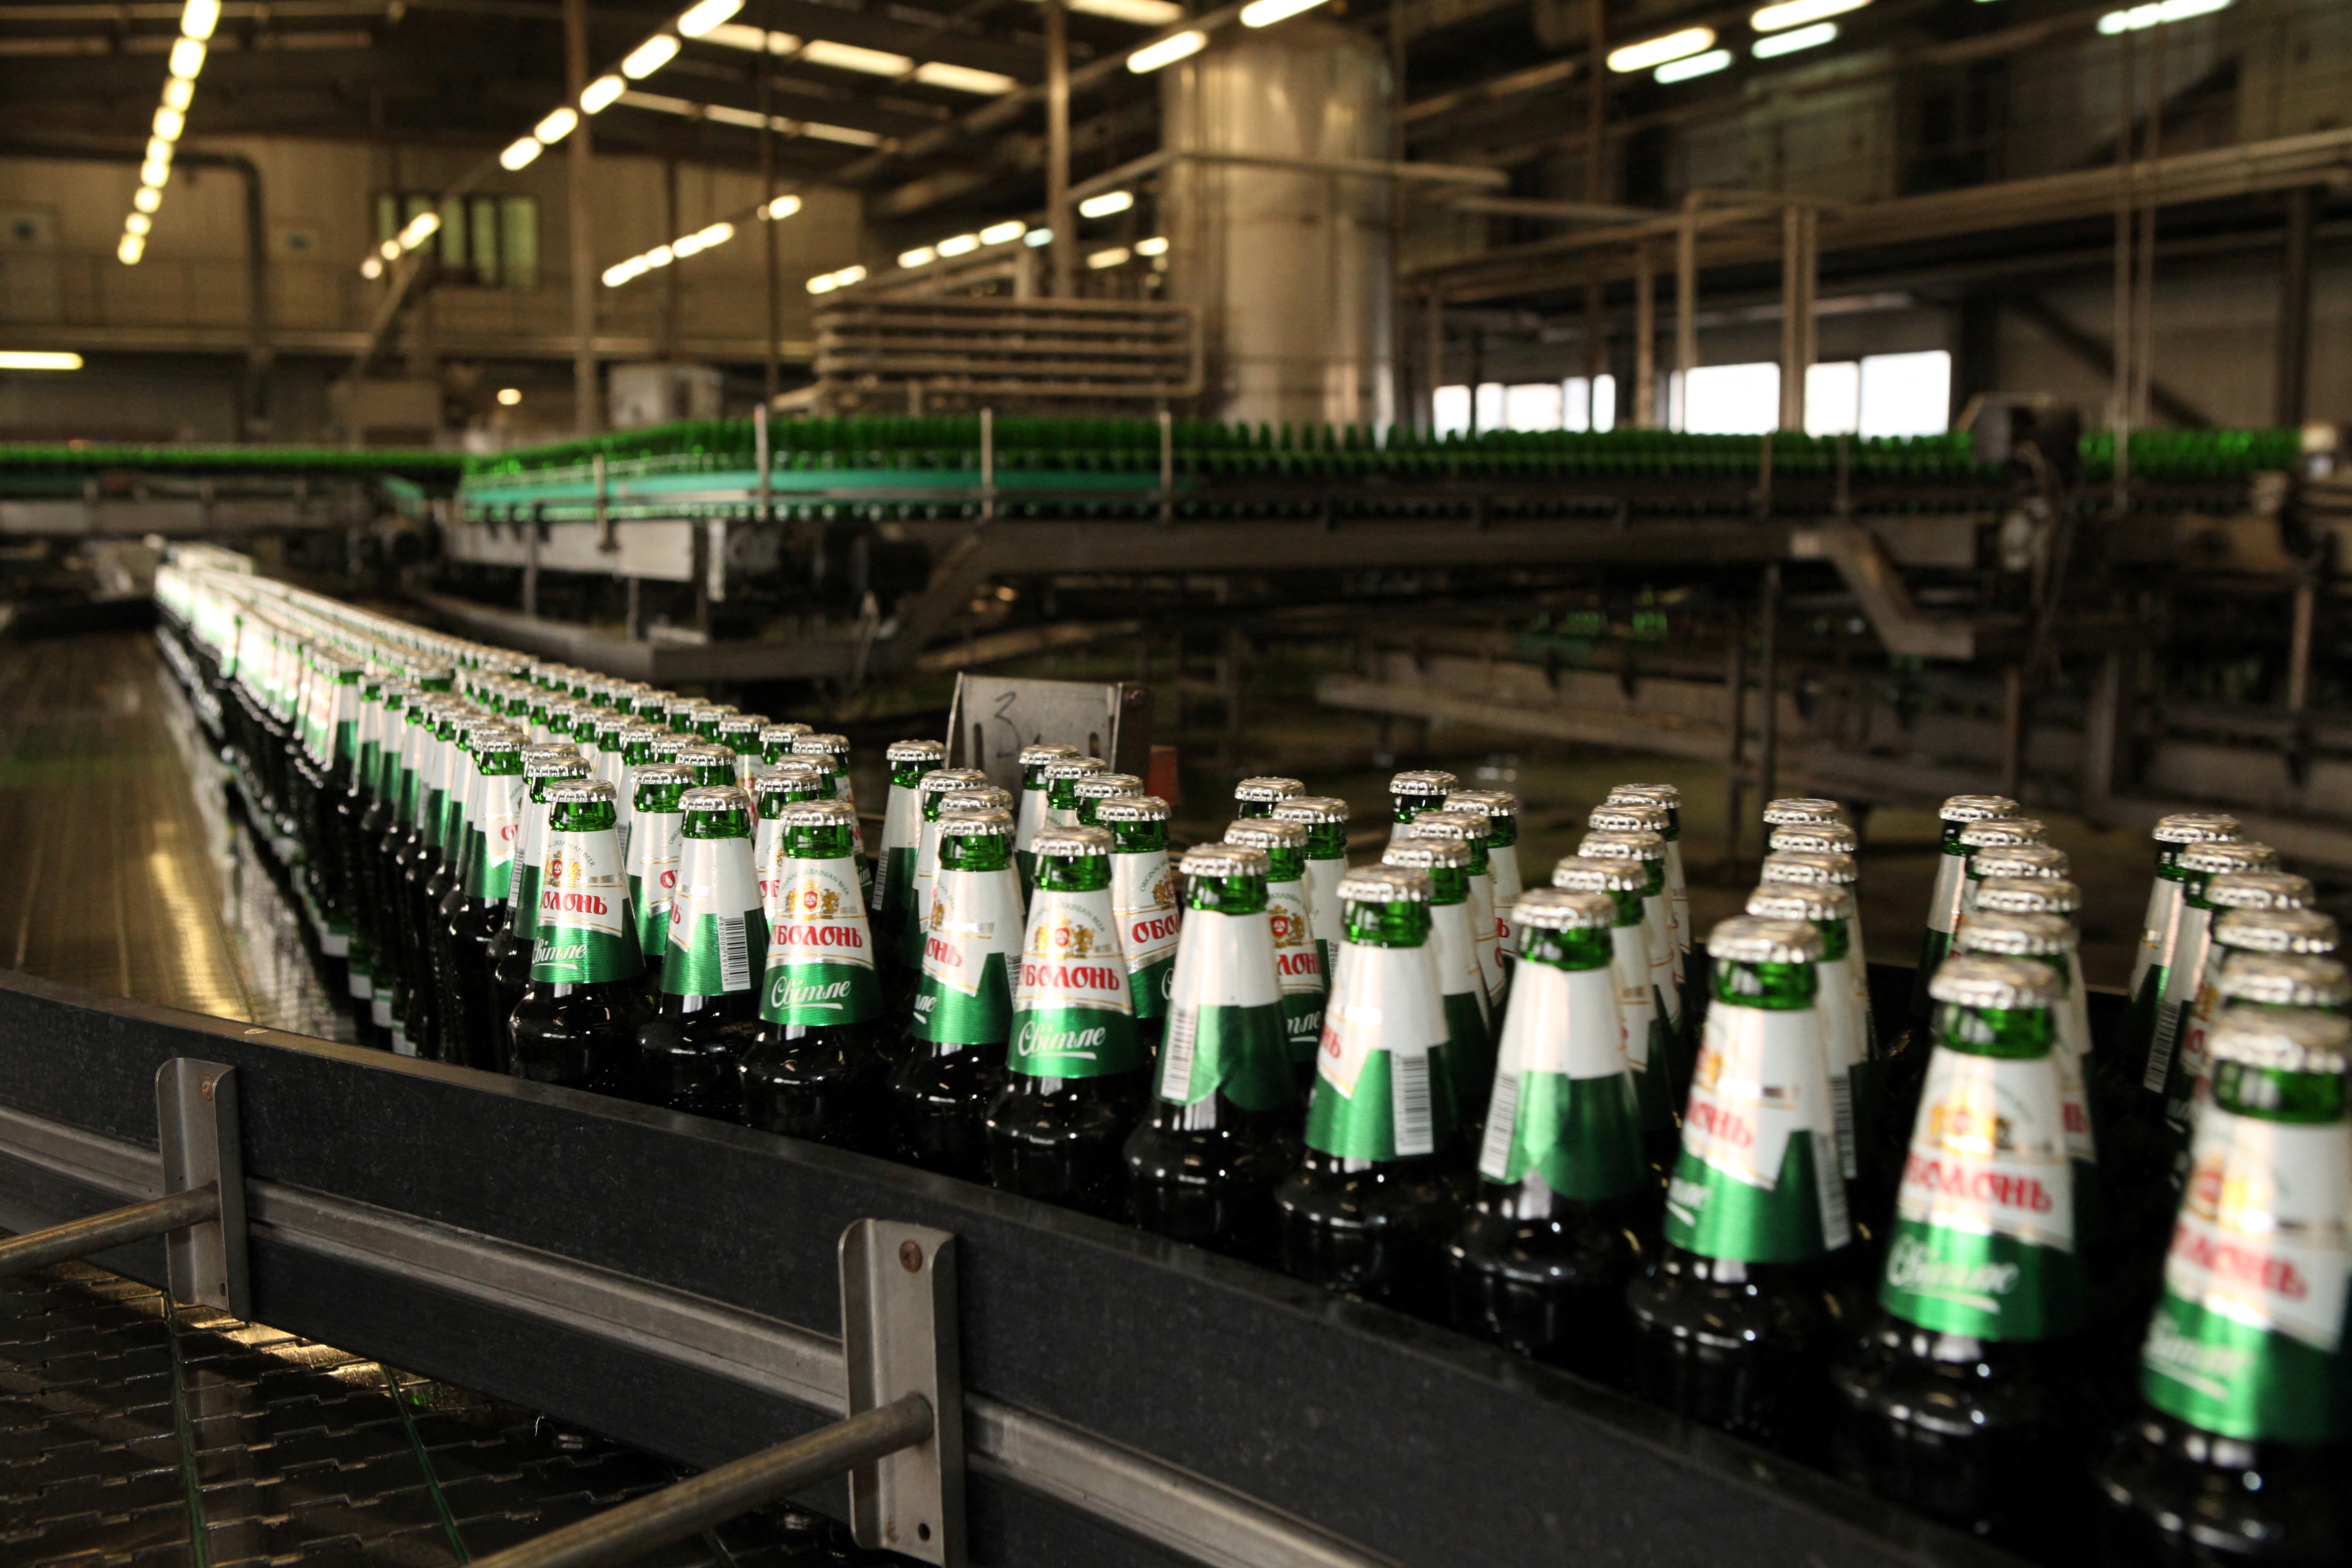 A handout photo of the Obolon beer bottles in the main Obolon brewery in Kyiv